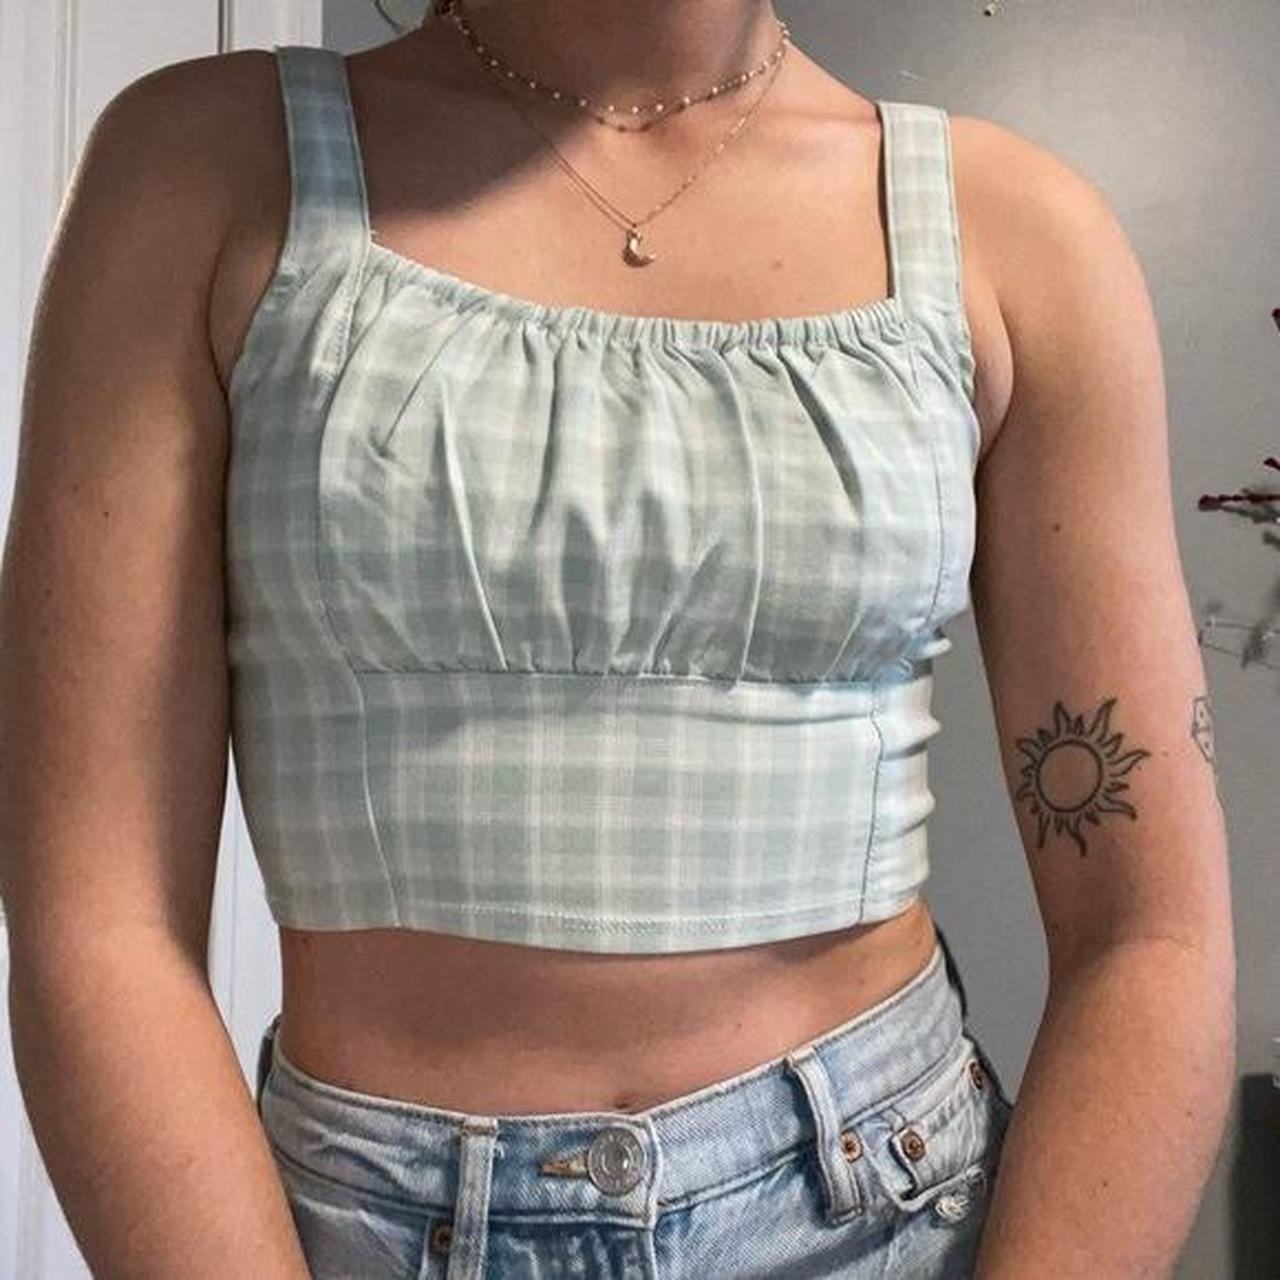 Hollister stretchy bustier crop top in green gingham